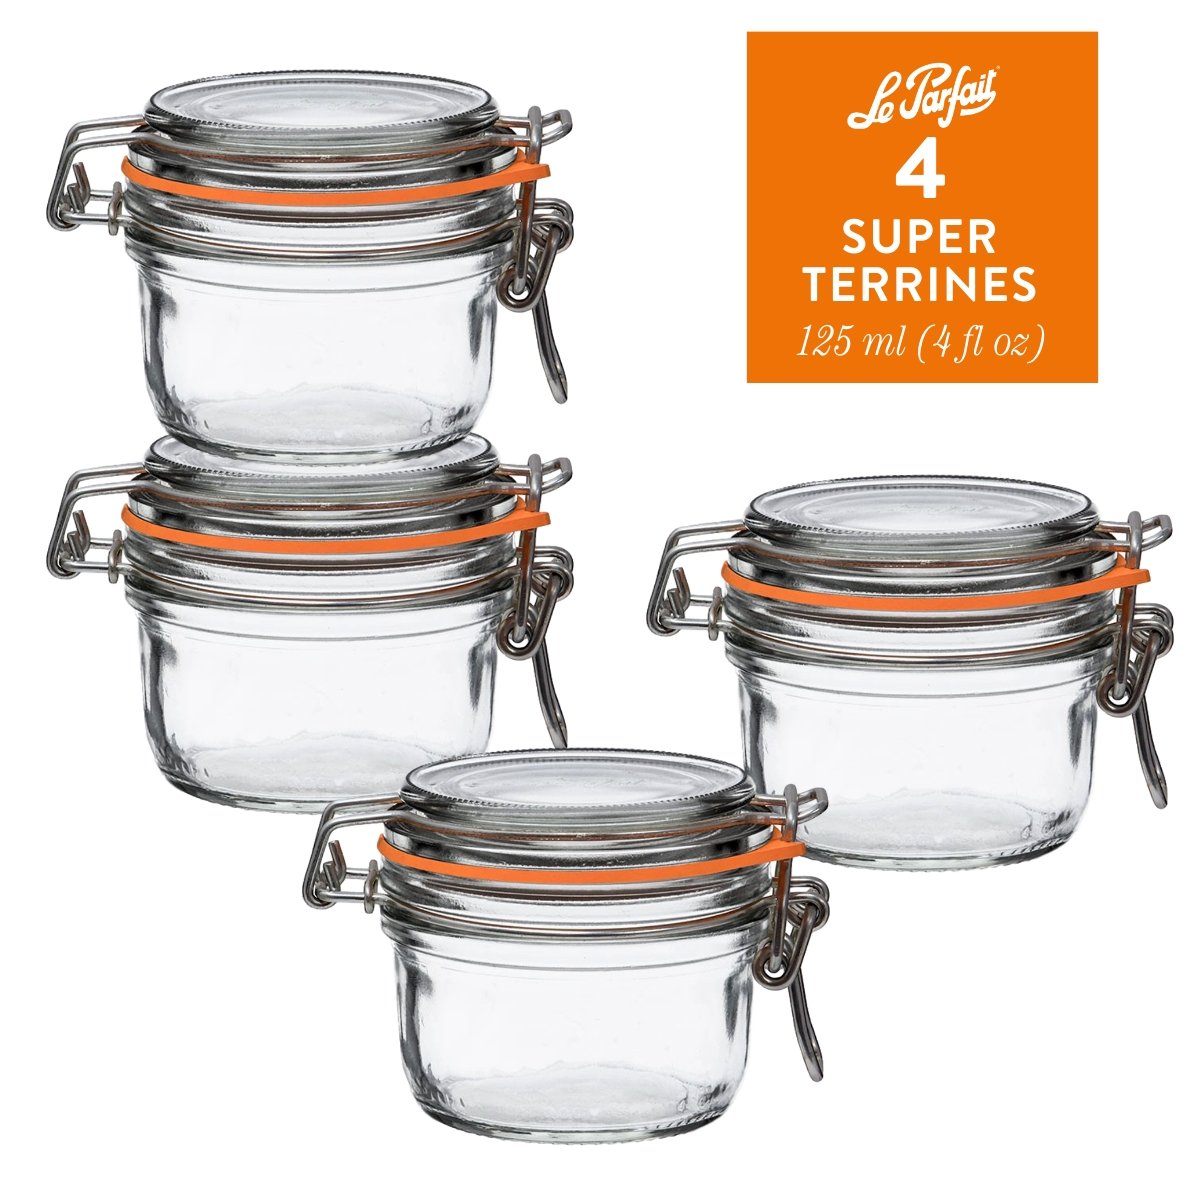 Le Parfait Super Jars – French Glass Round Jars With Airtight Lid For  Canning Food Storage, 4 pk / 32 fl oz - Ralphs